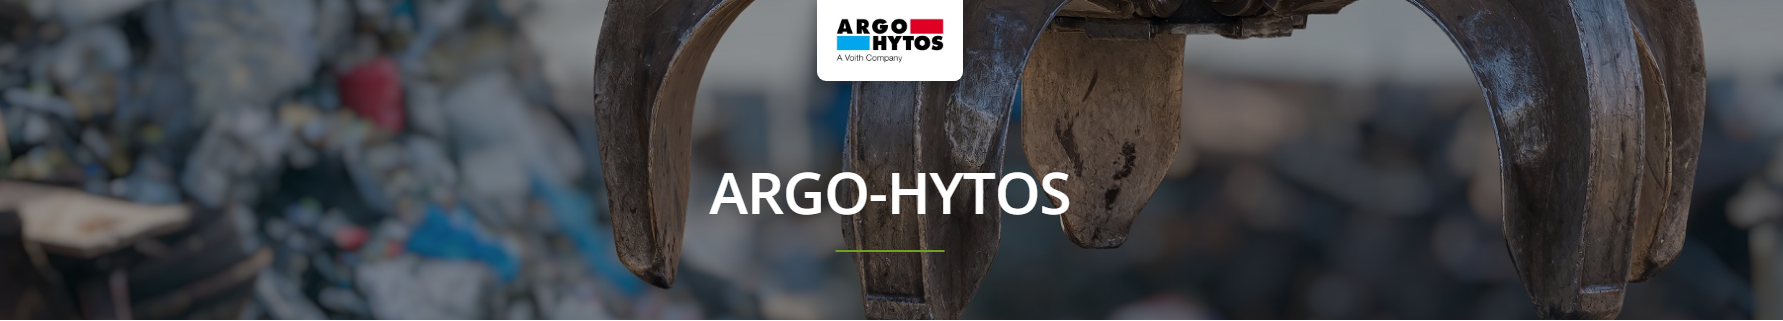 Argo-Hytos Valves and Solenoid Systems